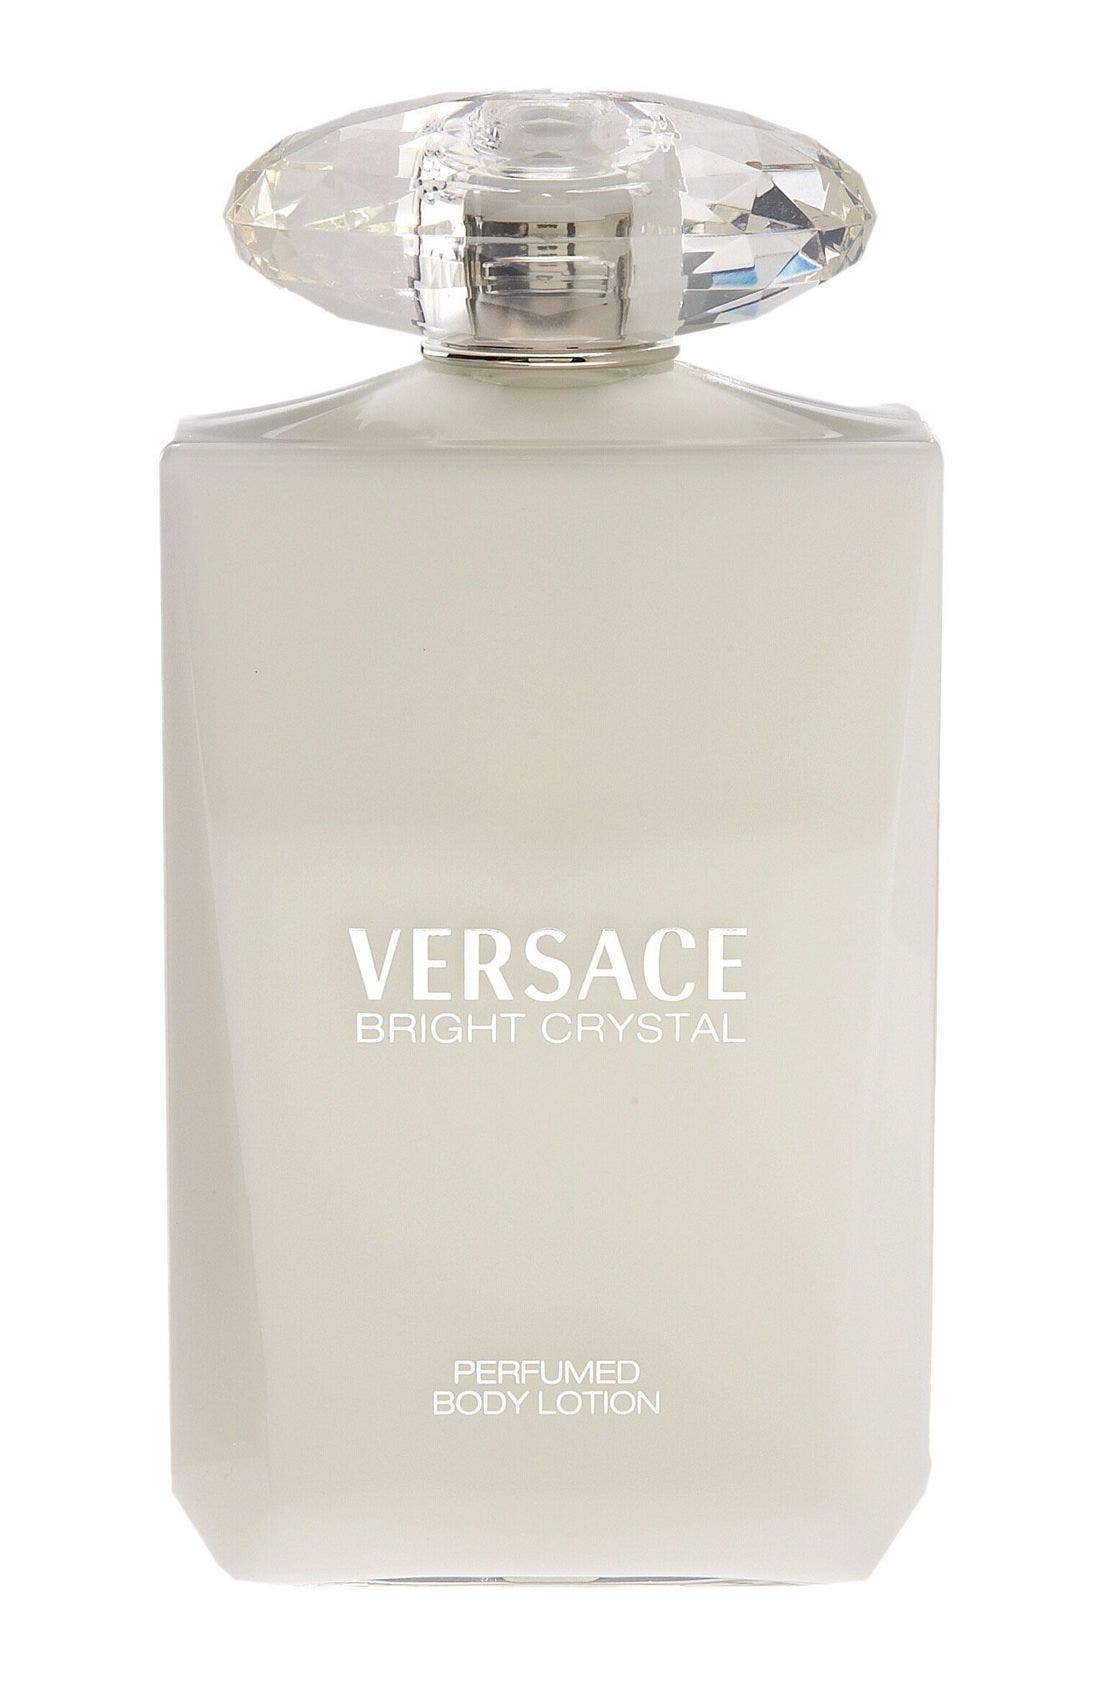 Versace Bright Crystal Body Lotion at Nordstrom